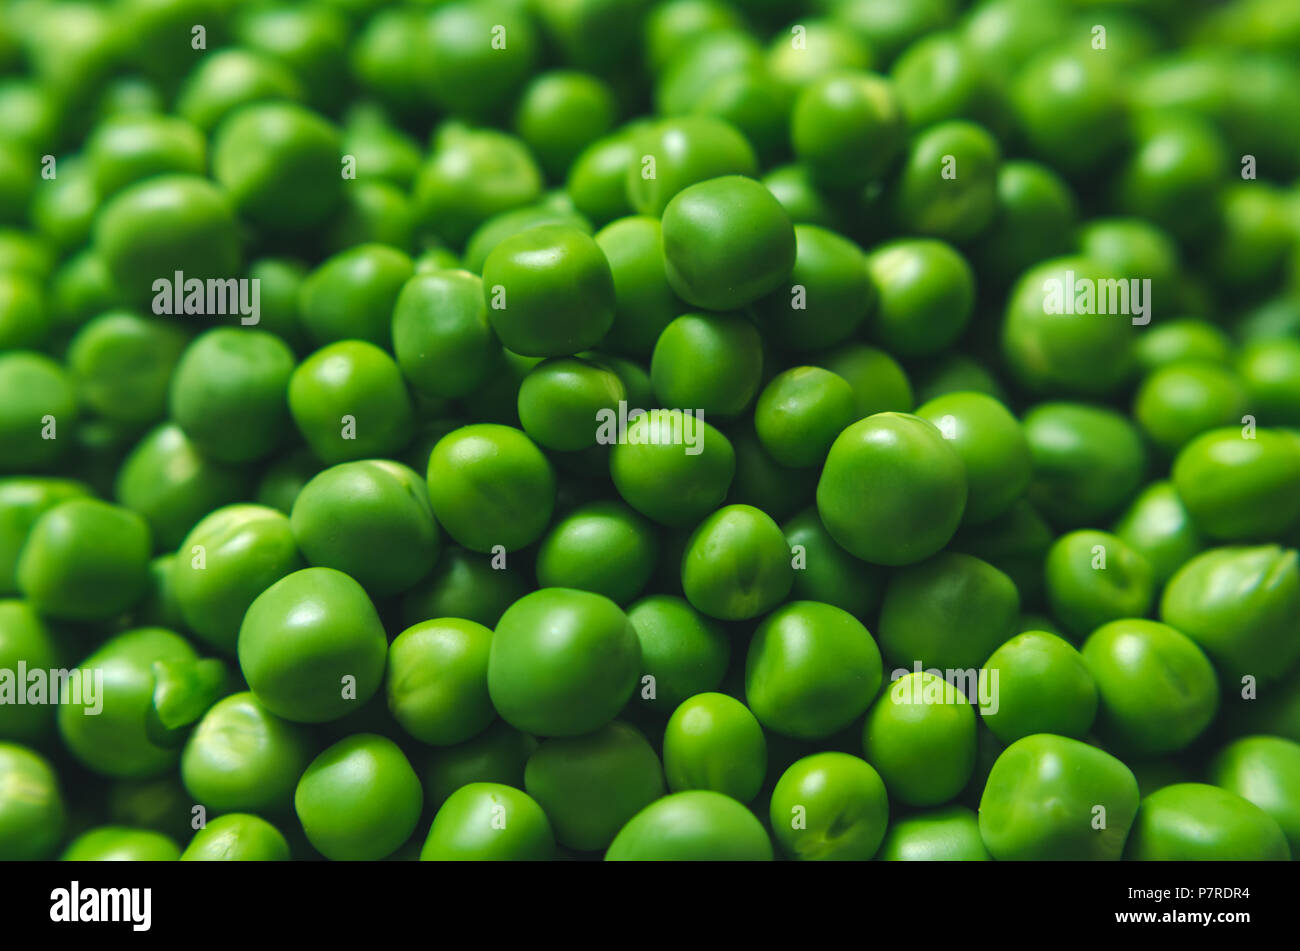 A whole lot of shelled Green peas Stock Photo